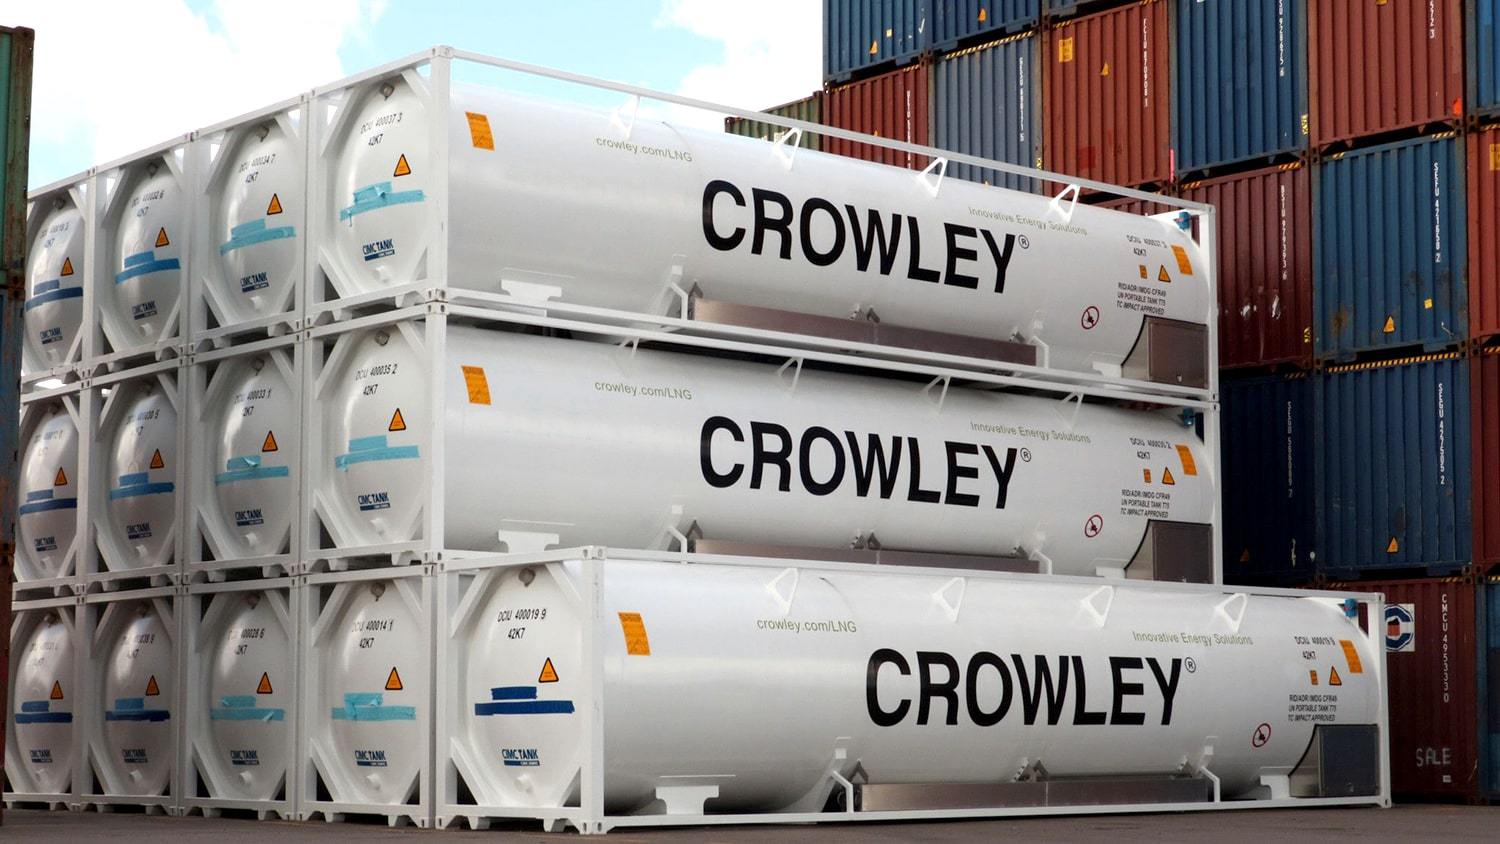 Crowley launches new unit to focus on LNG, offshore wind